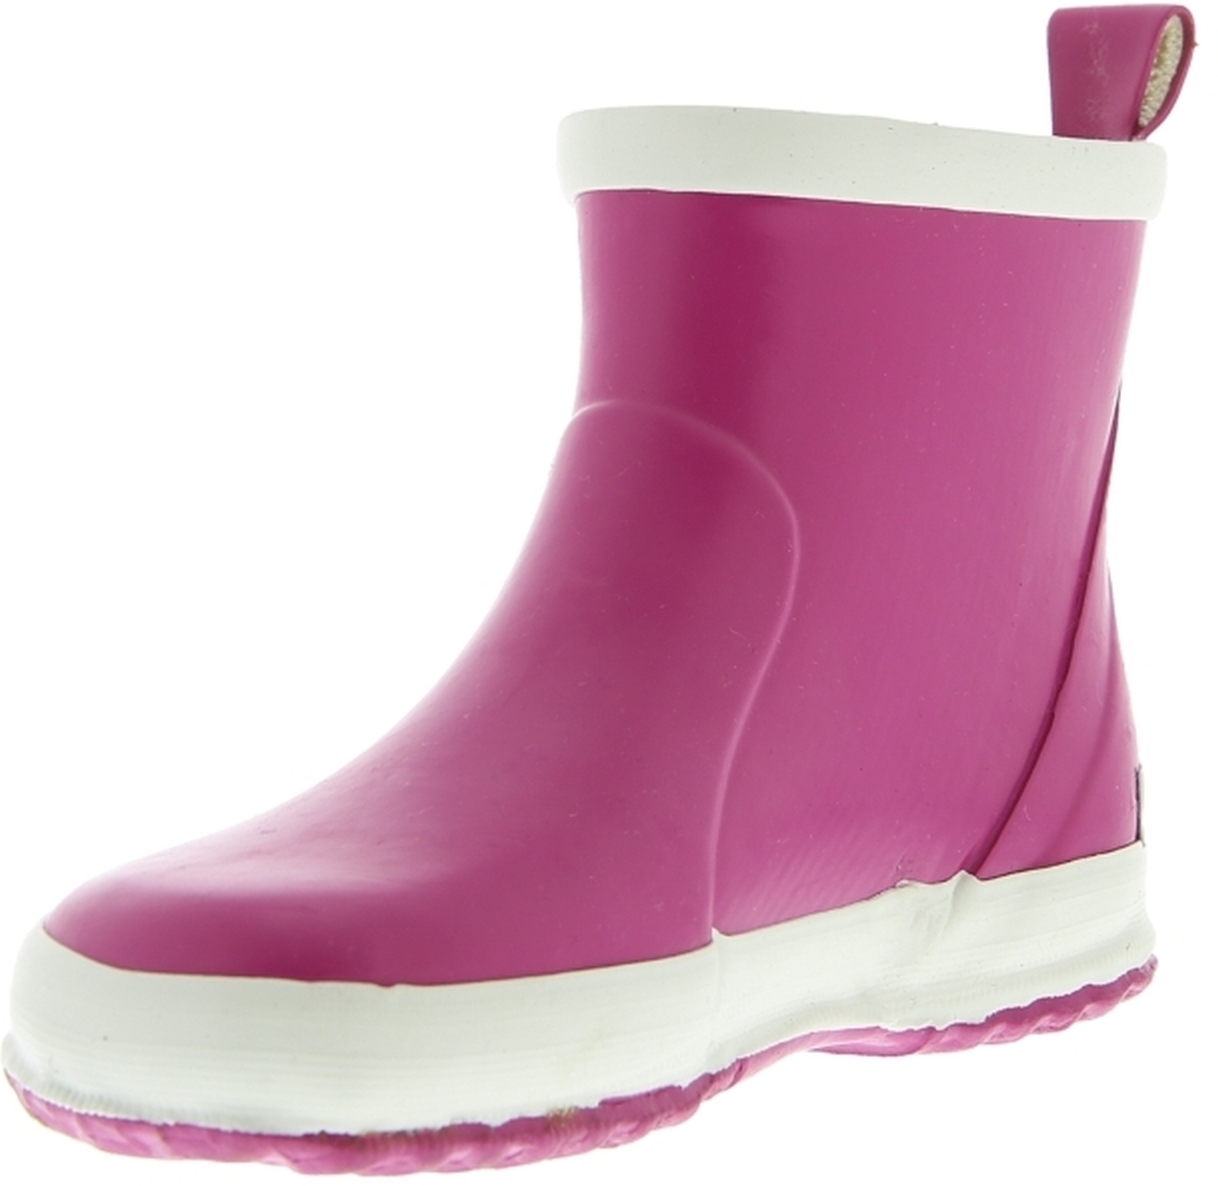 Bergstein Chelseaboot Fuxia Rubber